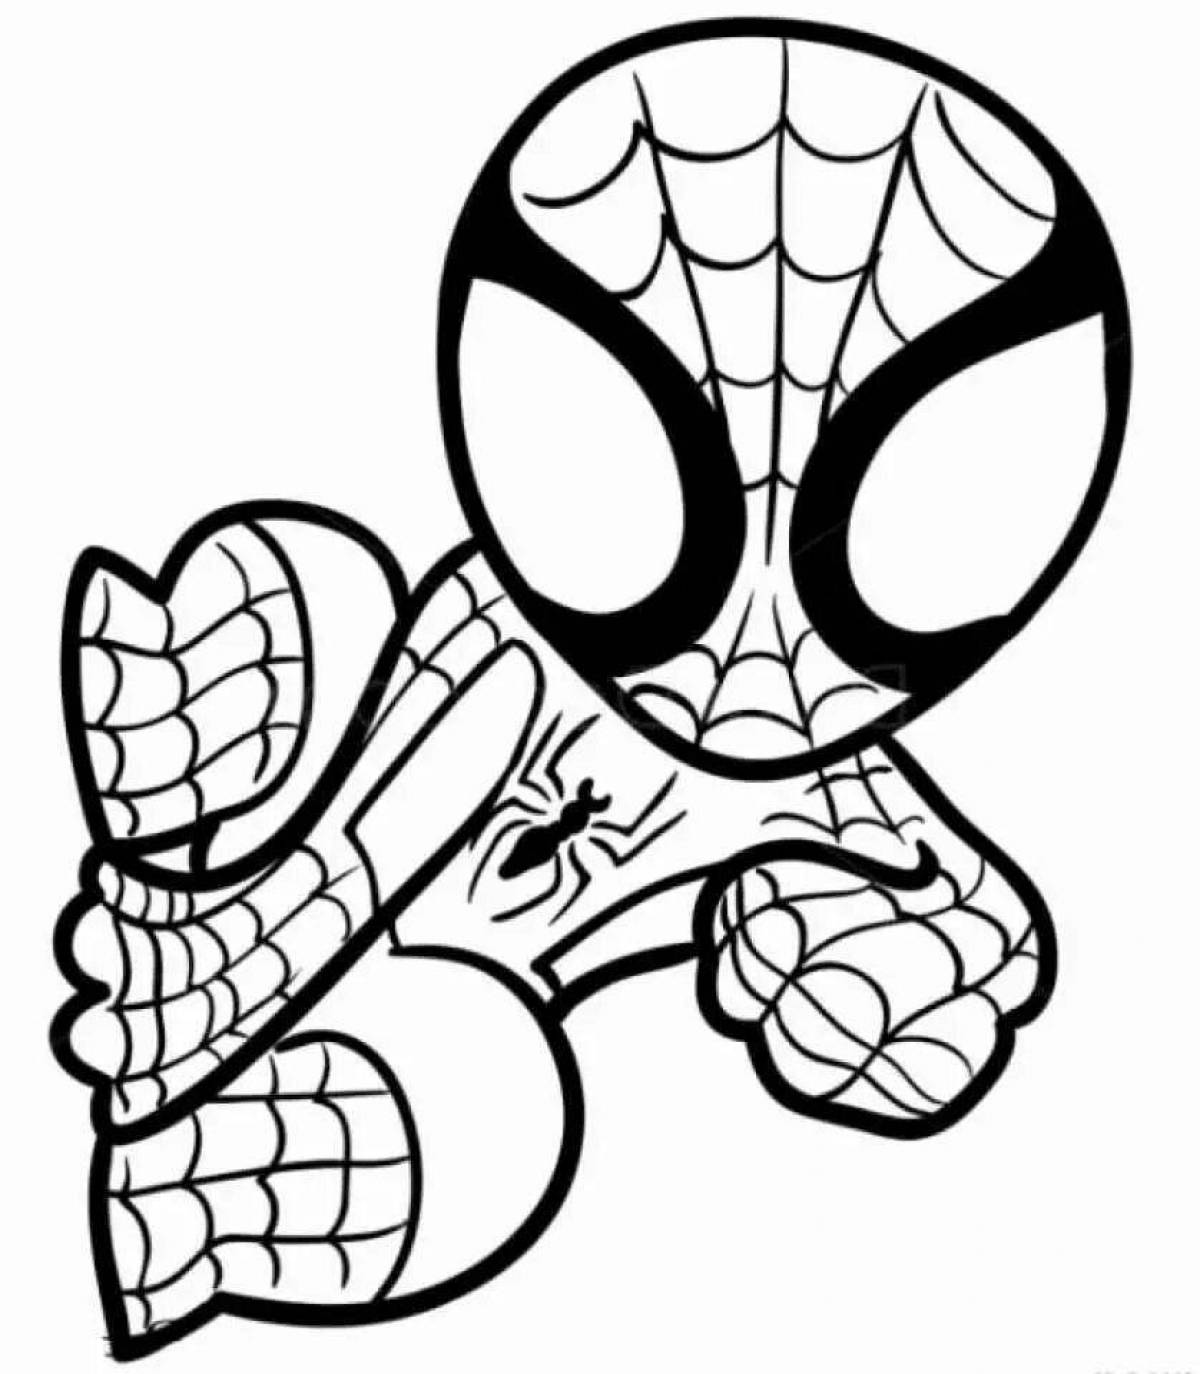 Animated spiderman coloring page